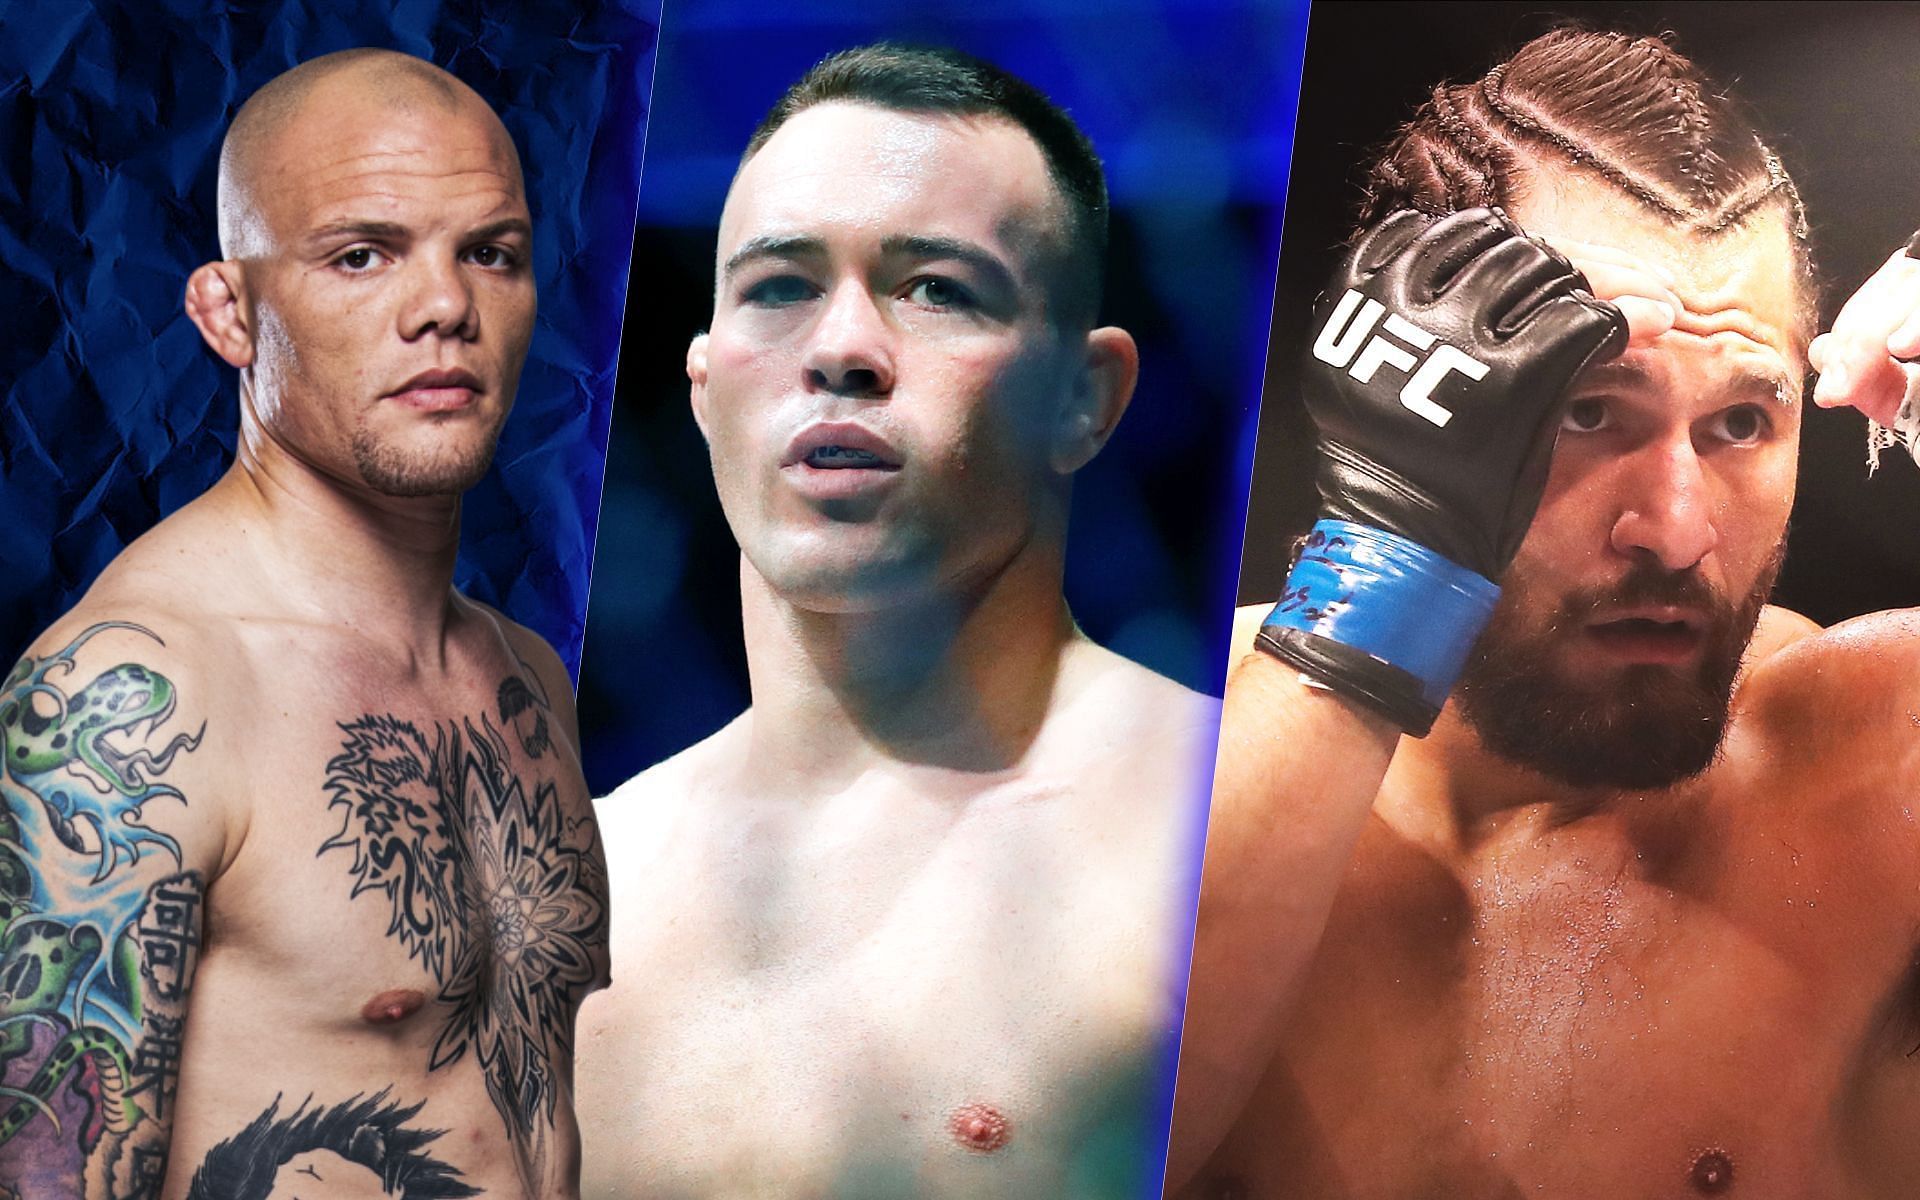 Anthony Smith (Left) previews the fight between Colby Covington (Center) and Jorge Masvidal (Right) (Image courtesy of Getty and ufc.com)